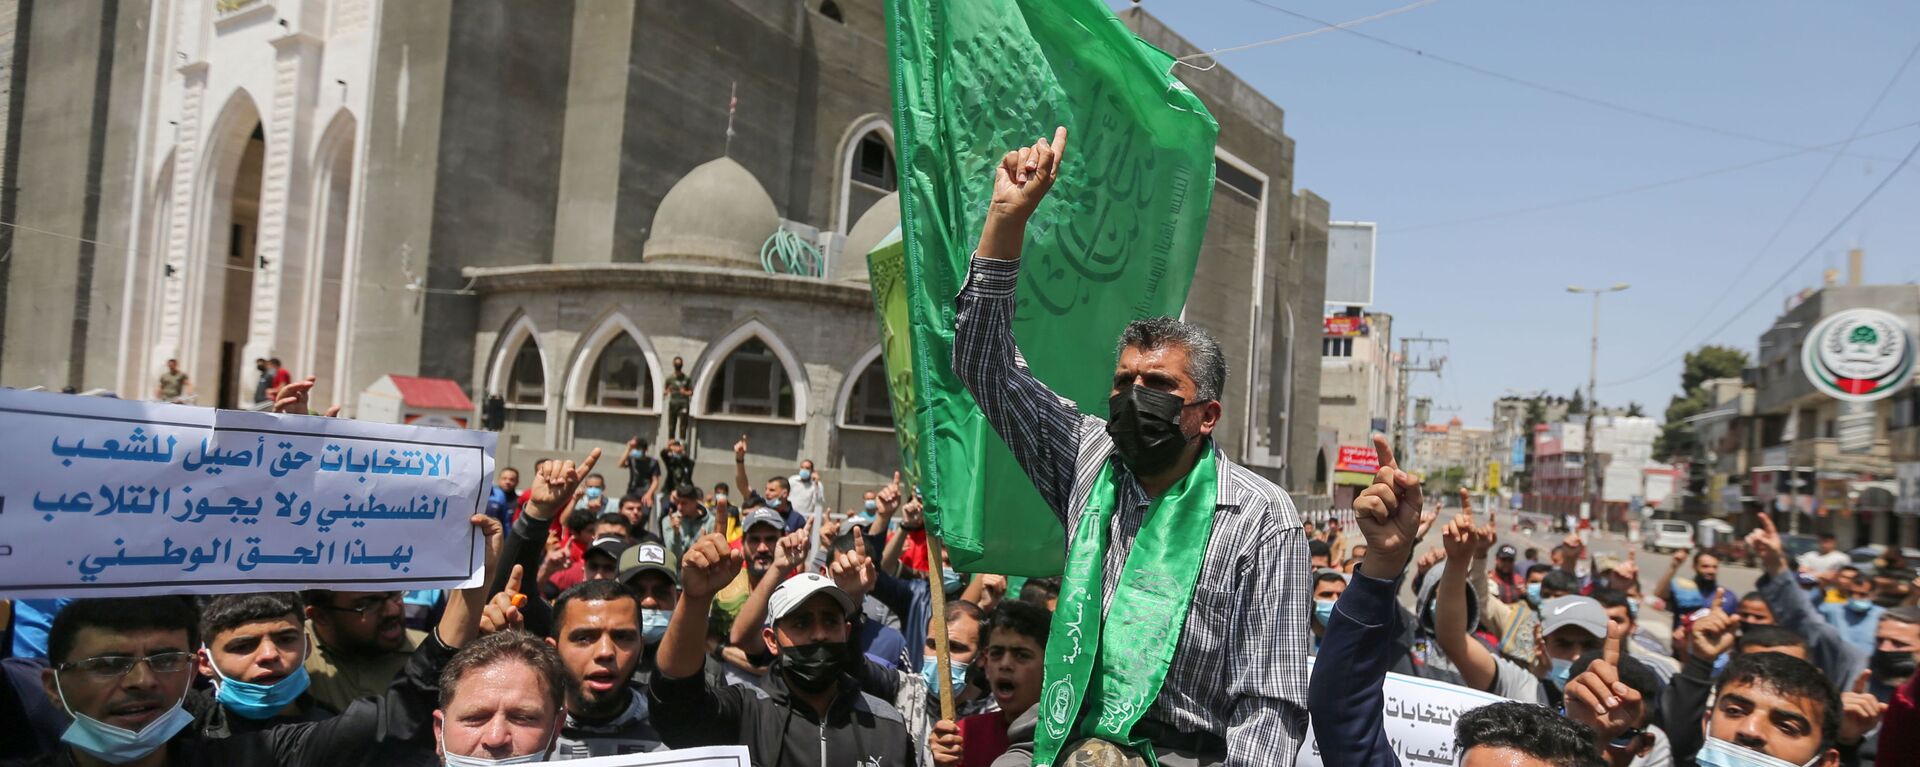 Hamas supporters take part in a protest against Palestinian President Mahmoud Abbas' decision to postpone planned parliamentary elections, in the southern Gaza Strip on April 30, 2021.  - Sputnik International, 1920, 17.05.2021